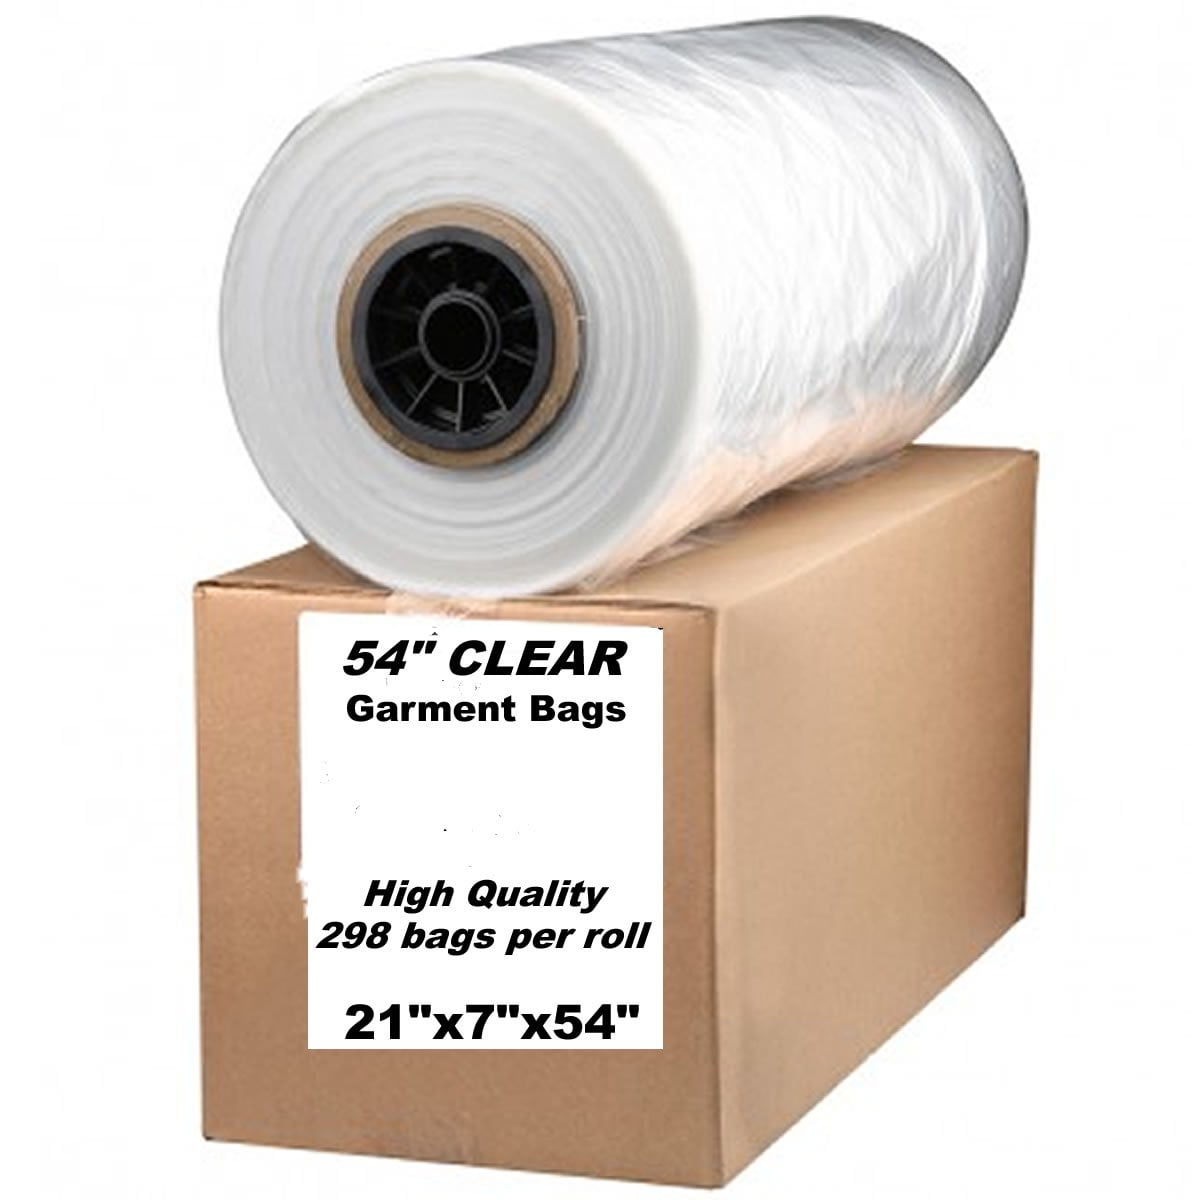 54" CLEAR Plastic Dry Cleaning Poly Bag Garment Bags 400 BAGS MADE IN USA 